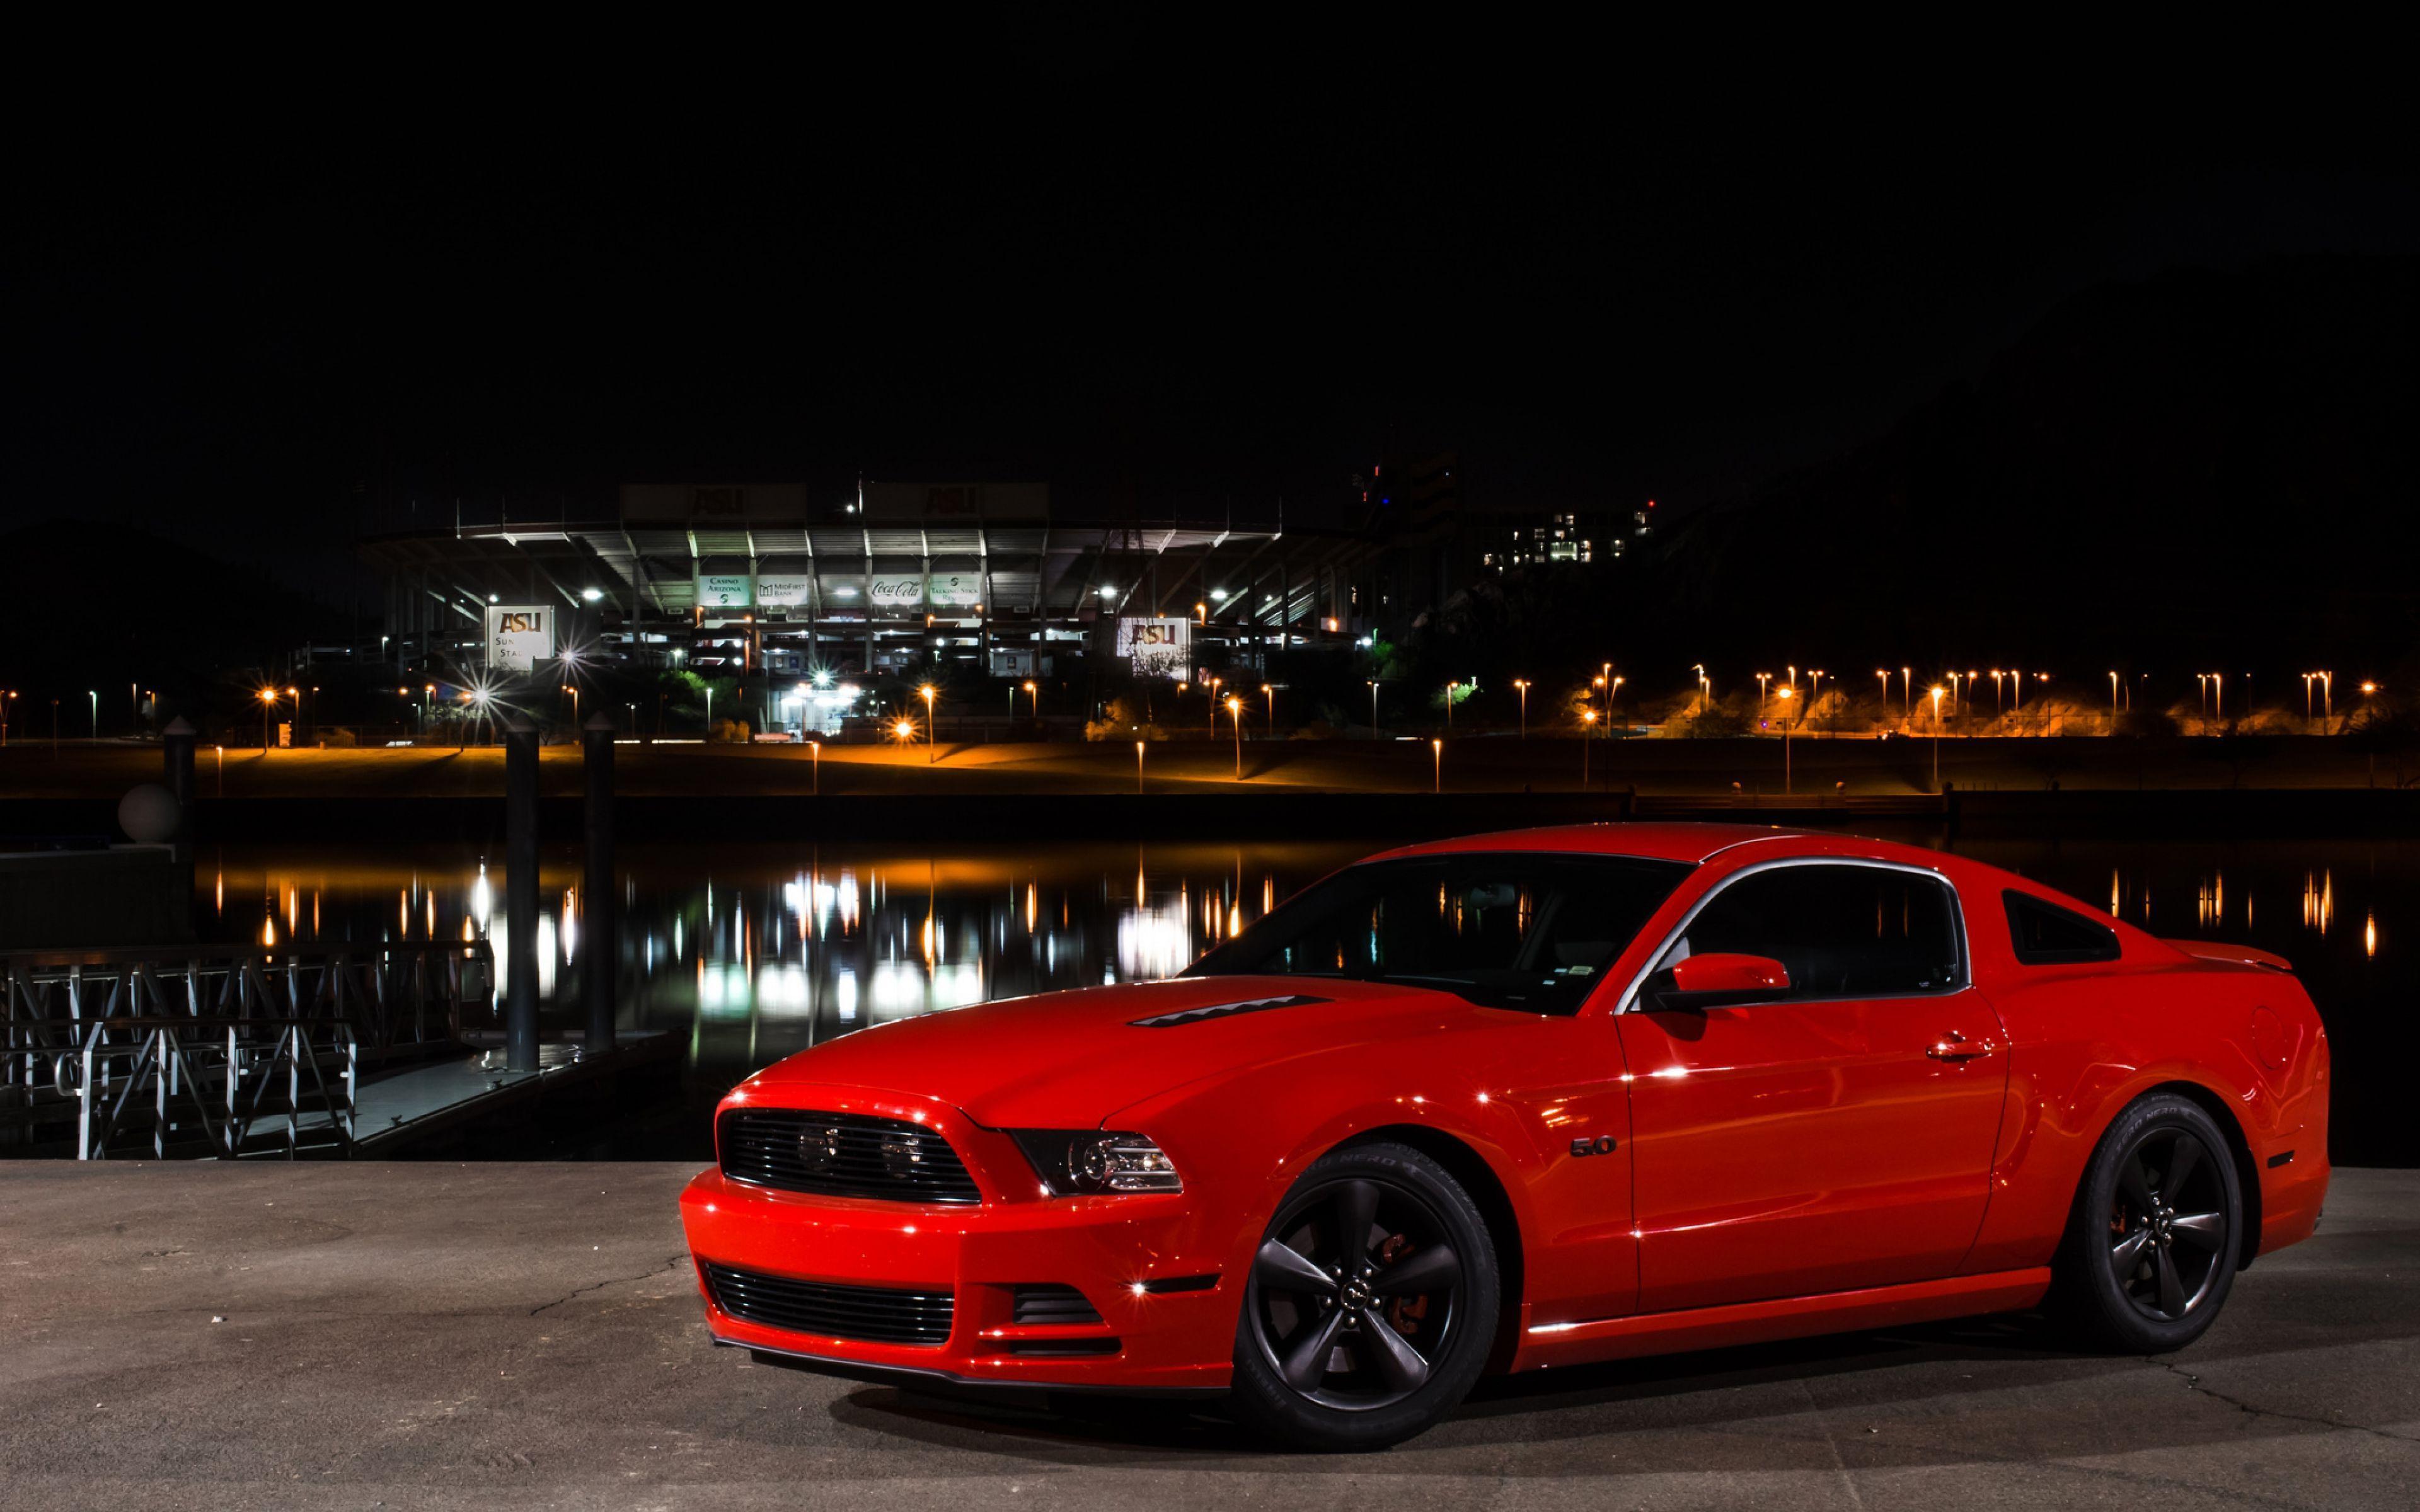 31+ 2001 Mustang Red Convirtable Wallpaper With Fire In The Background free download